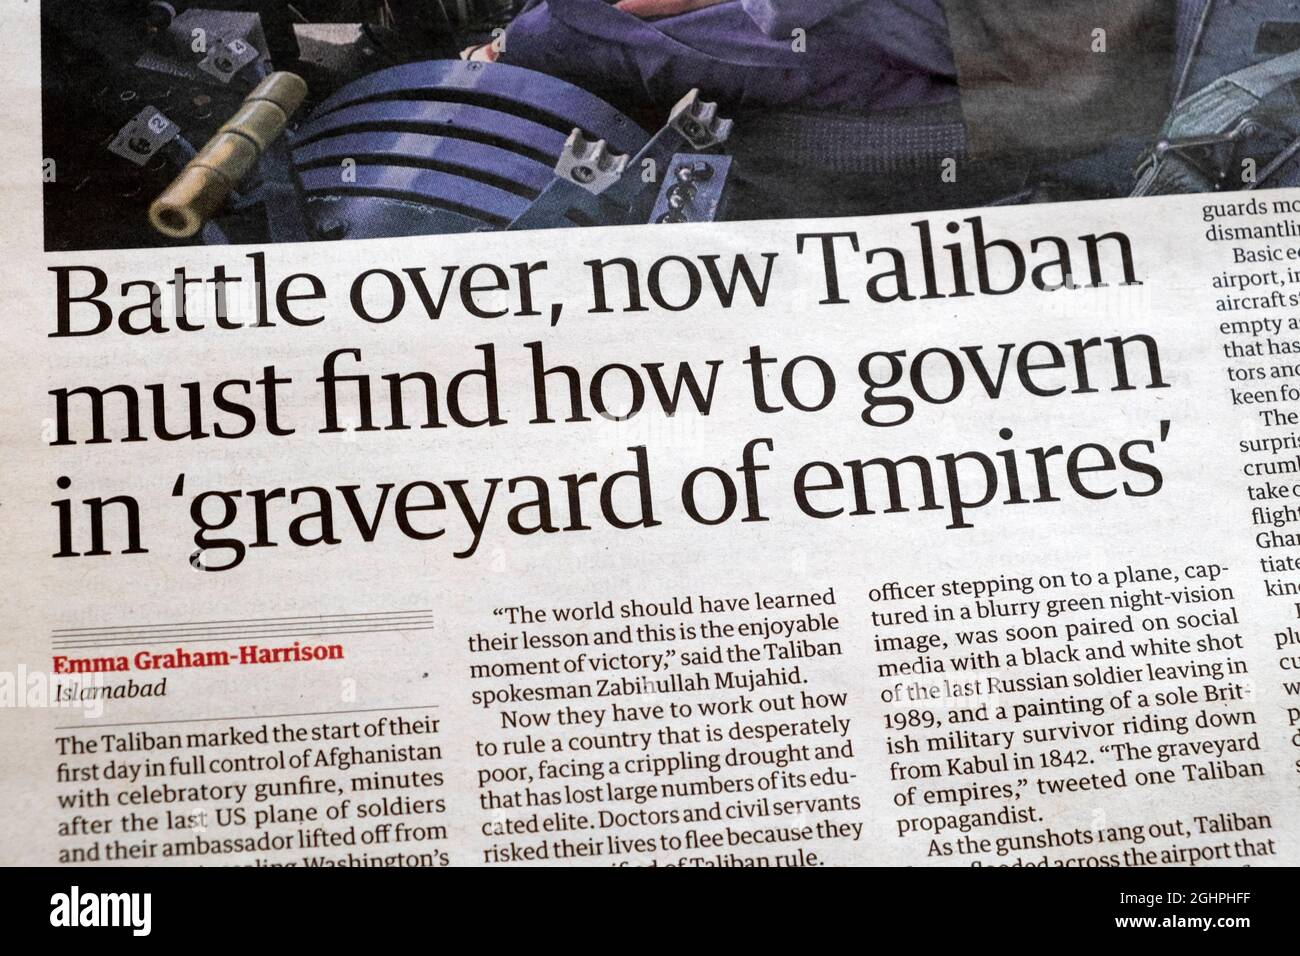 Journal Guardian, article principal « Battle Over, Now Taliban must find how to Goveryard in 'Graveyard of Empires' » 01 septembre 2021 Londres Angleterre Royaume-Uni Banque D'Images